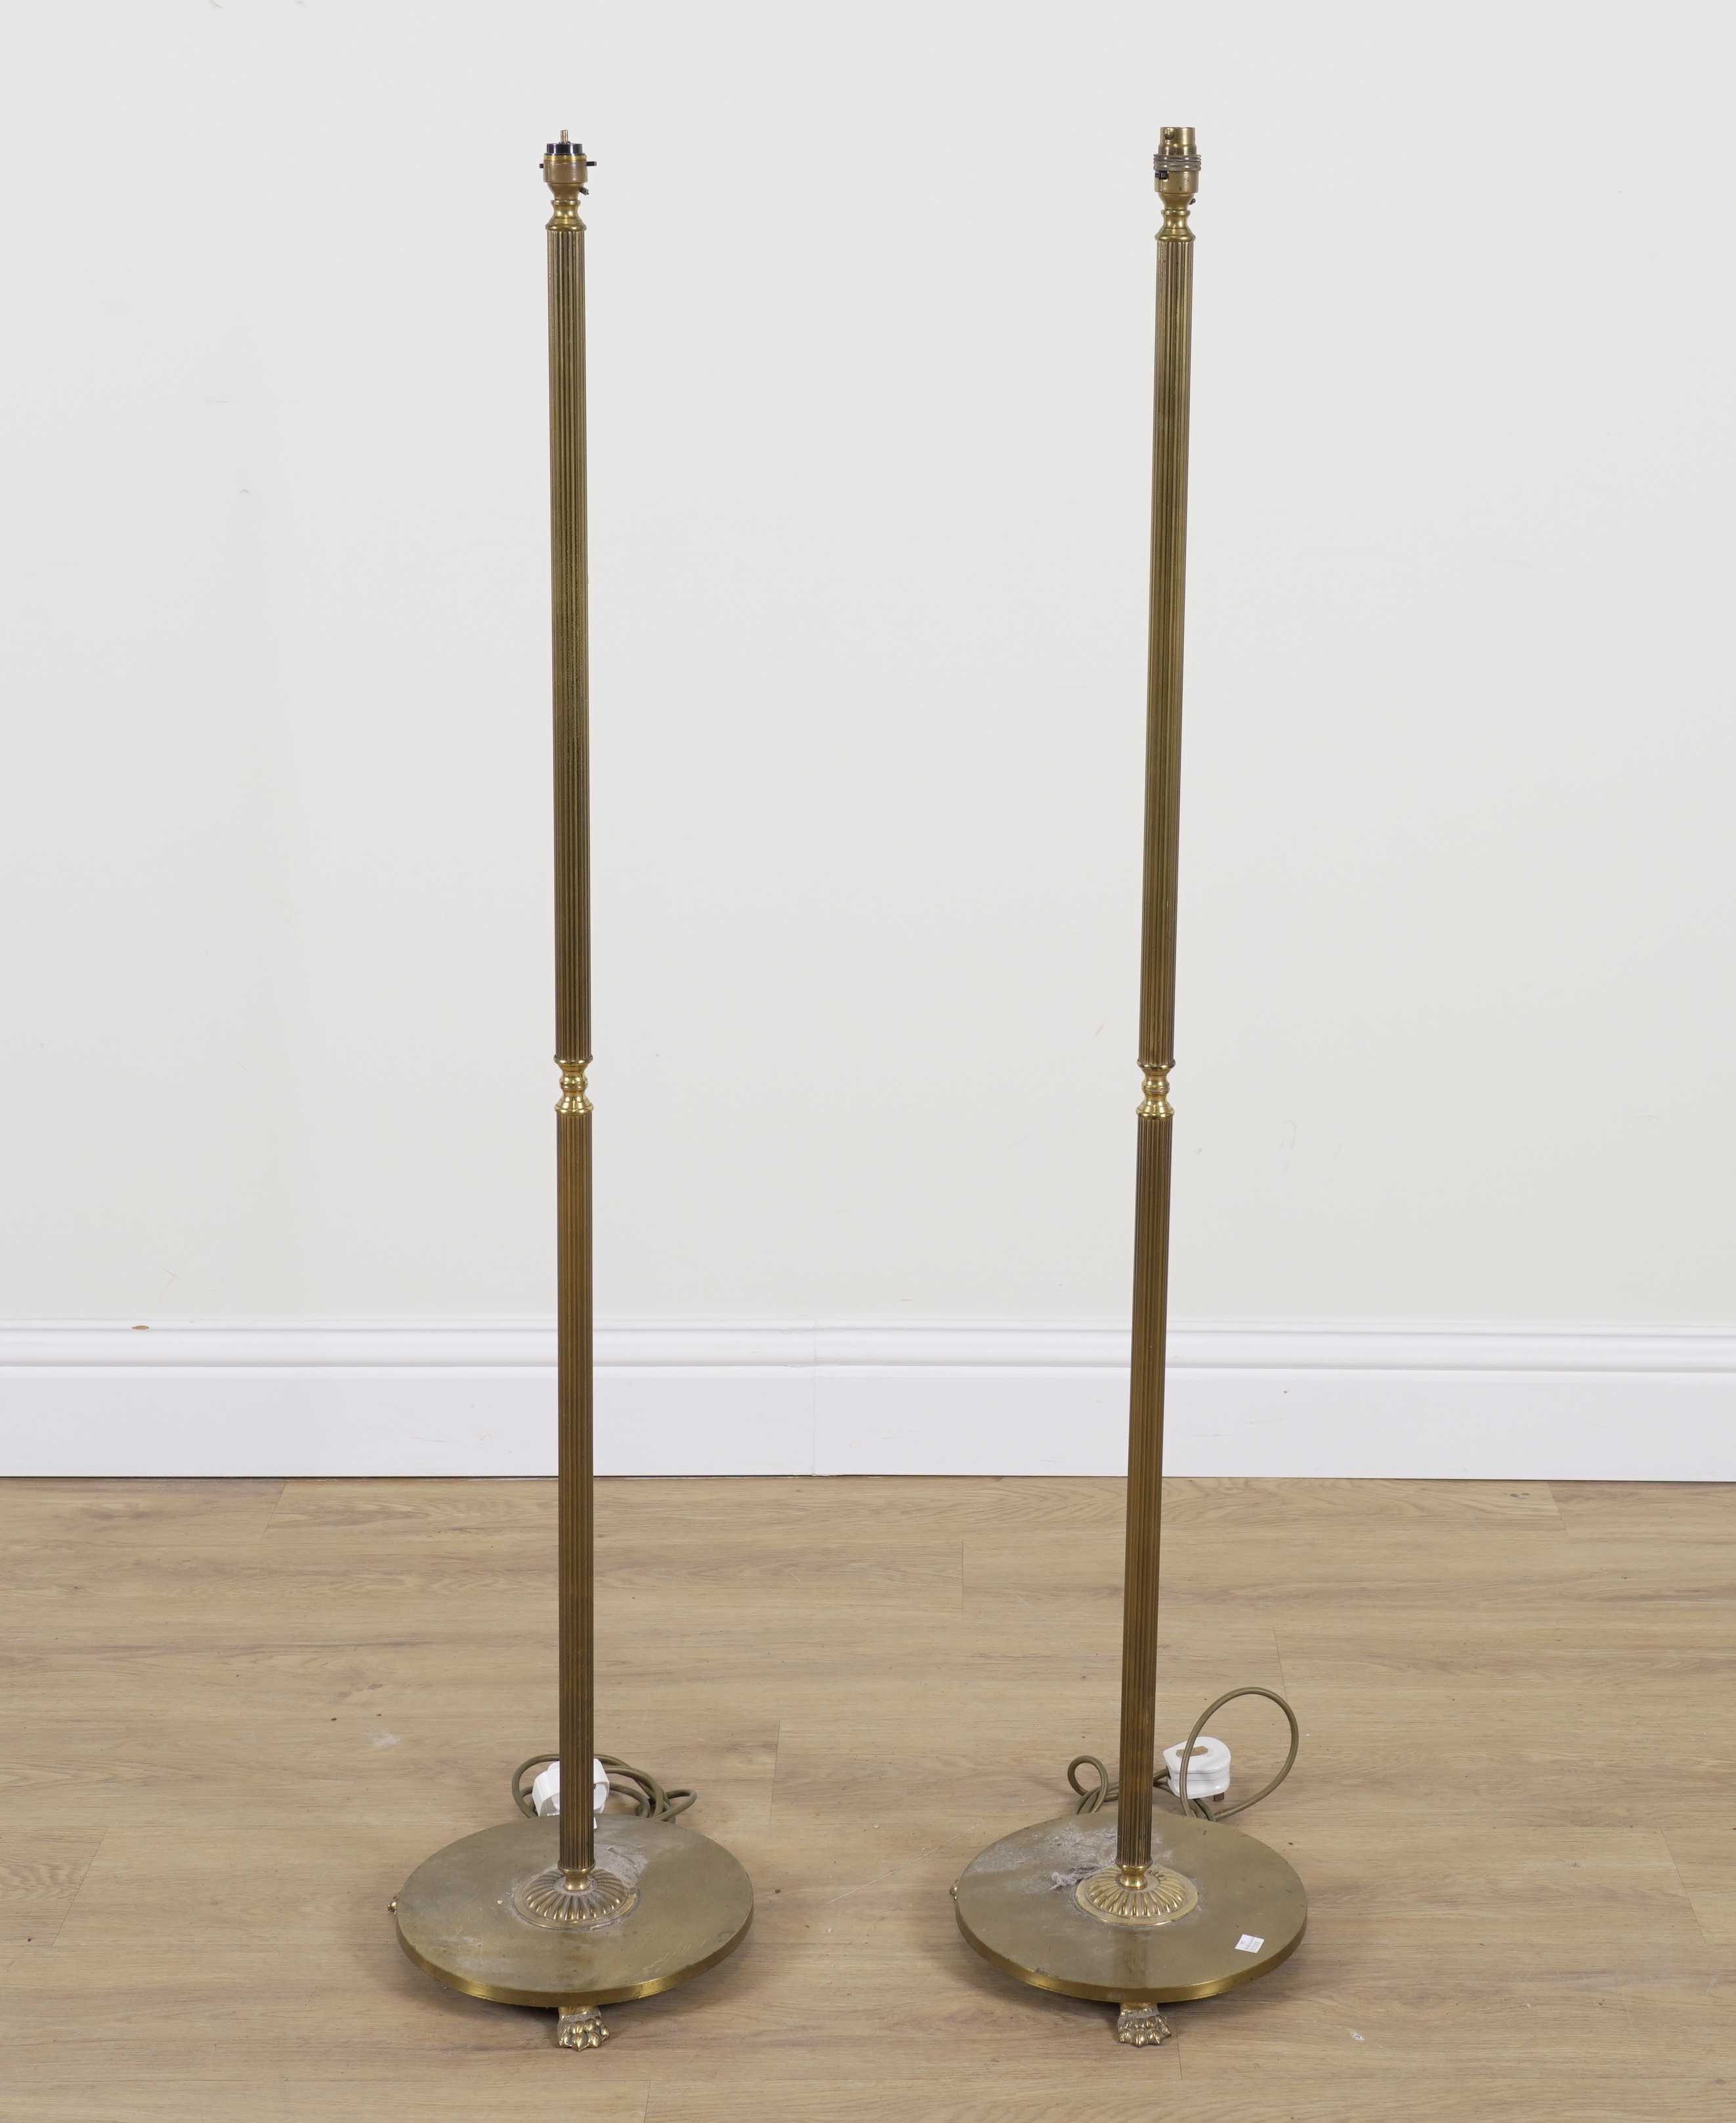 A PAIR OF BRASS FLUTED FLOOR STANDING LIGHTS (2) - Image 2 of 3